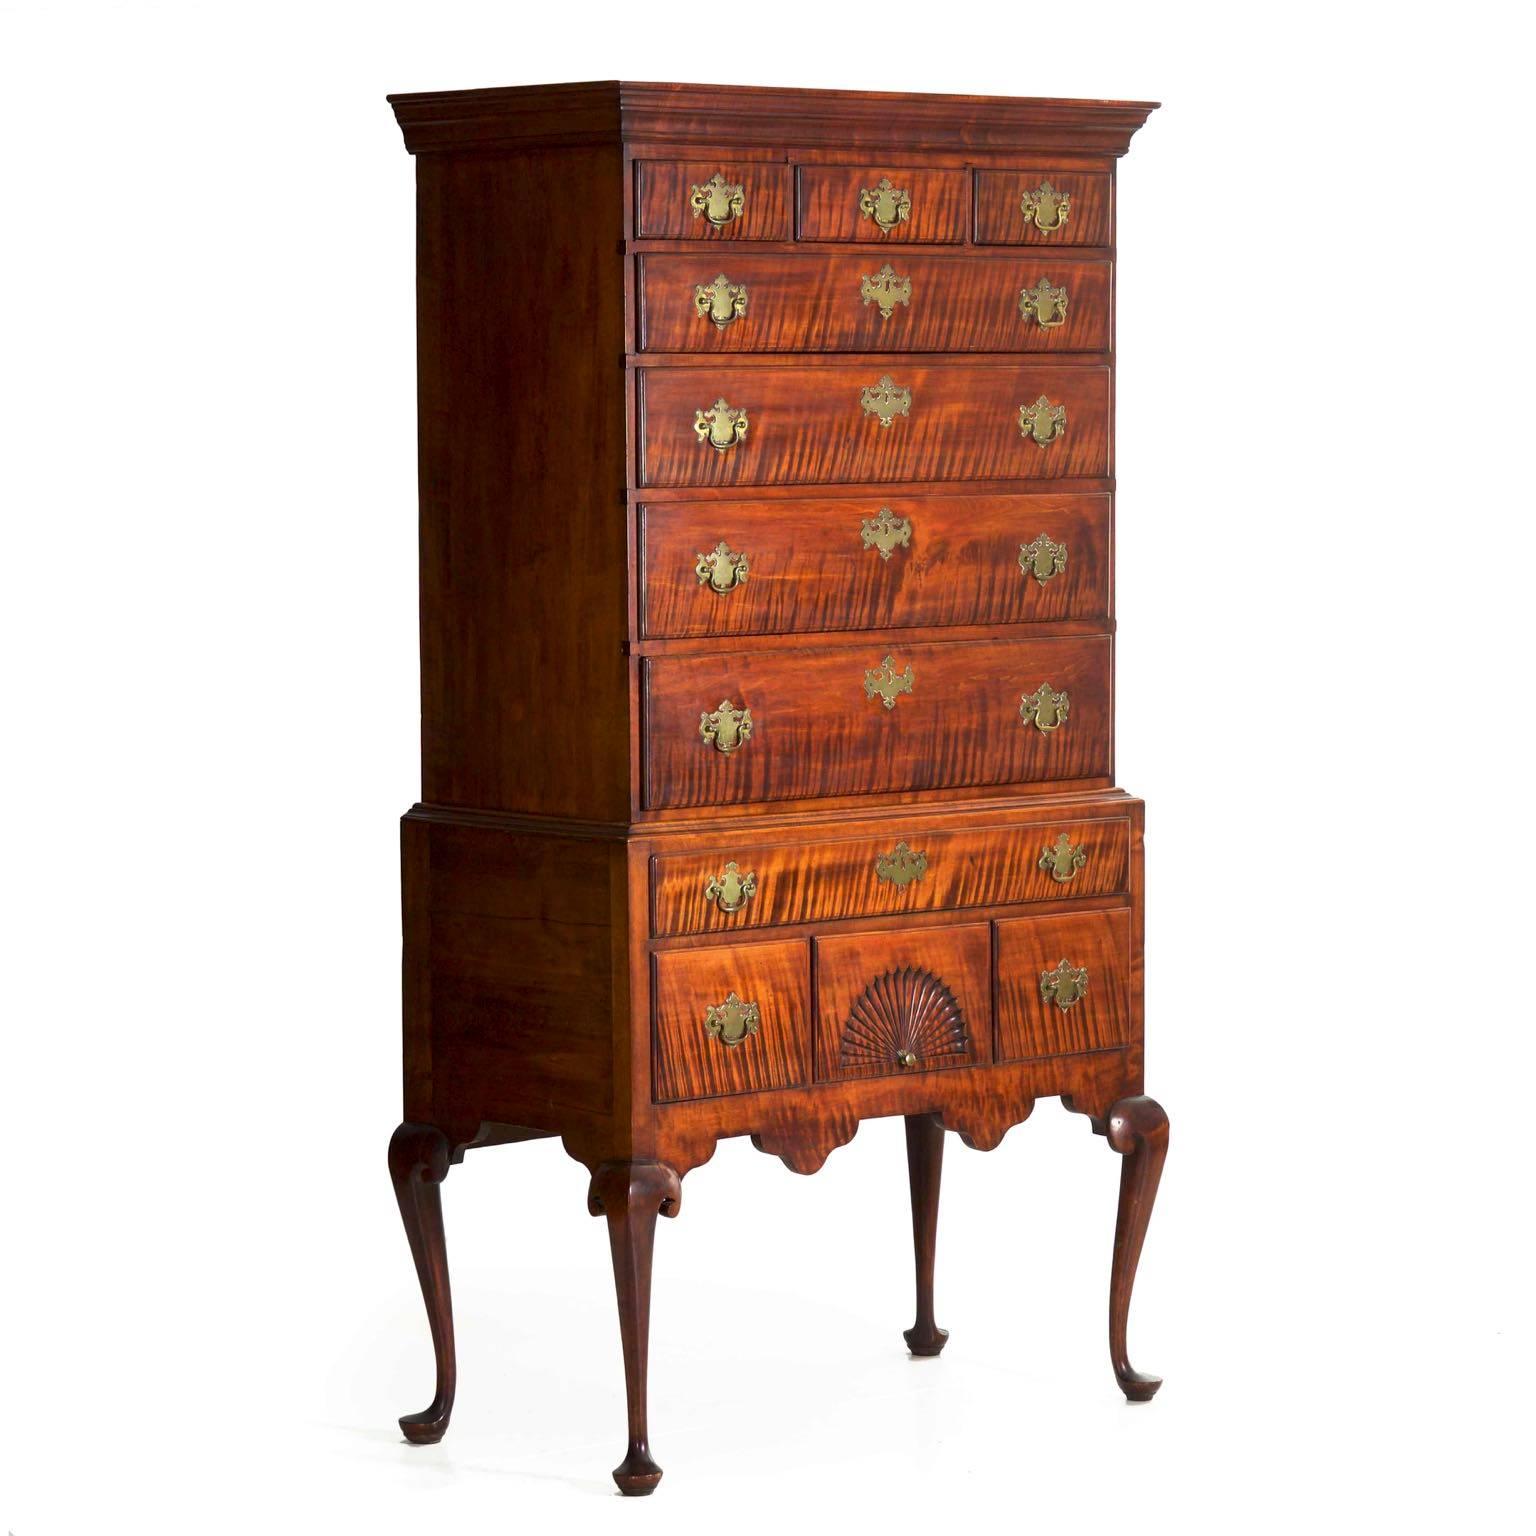 This superb New England highboy is crafted out of a powerful curly maple hardwood which lends gorgeous grain striations across the graduated drawers. There is always an interesting progression in the furniture design that ranges from the utilitarian